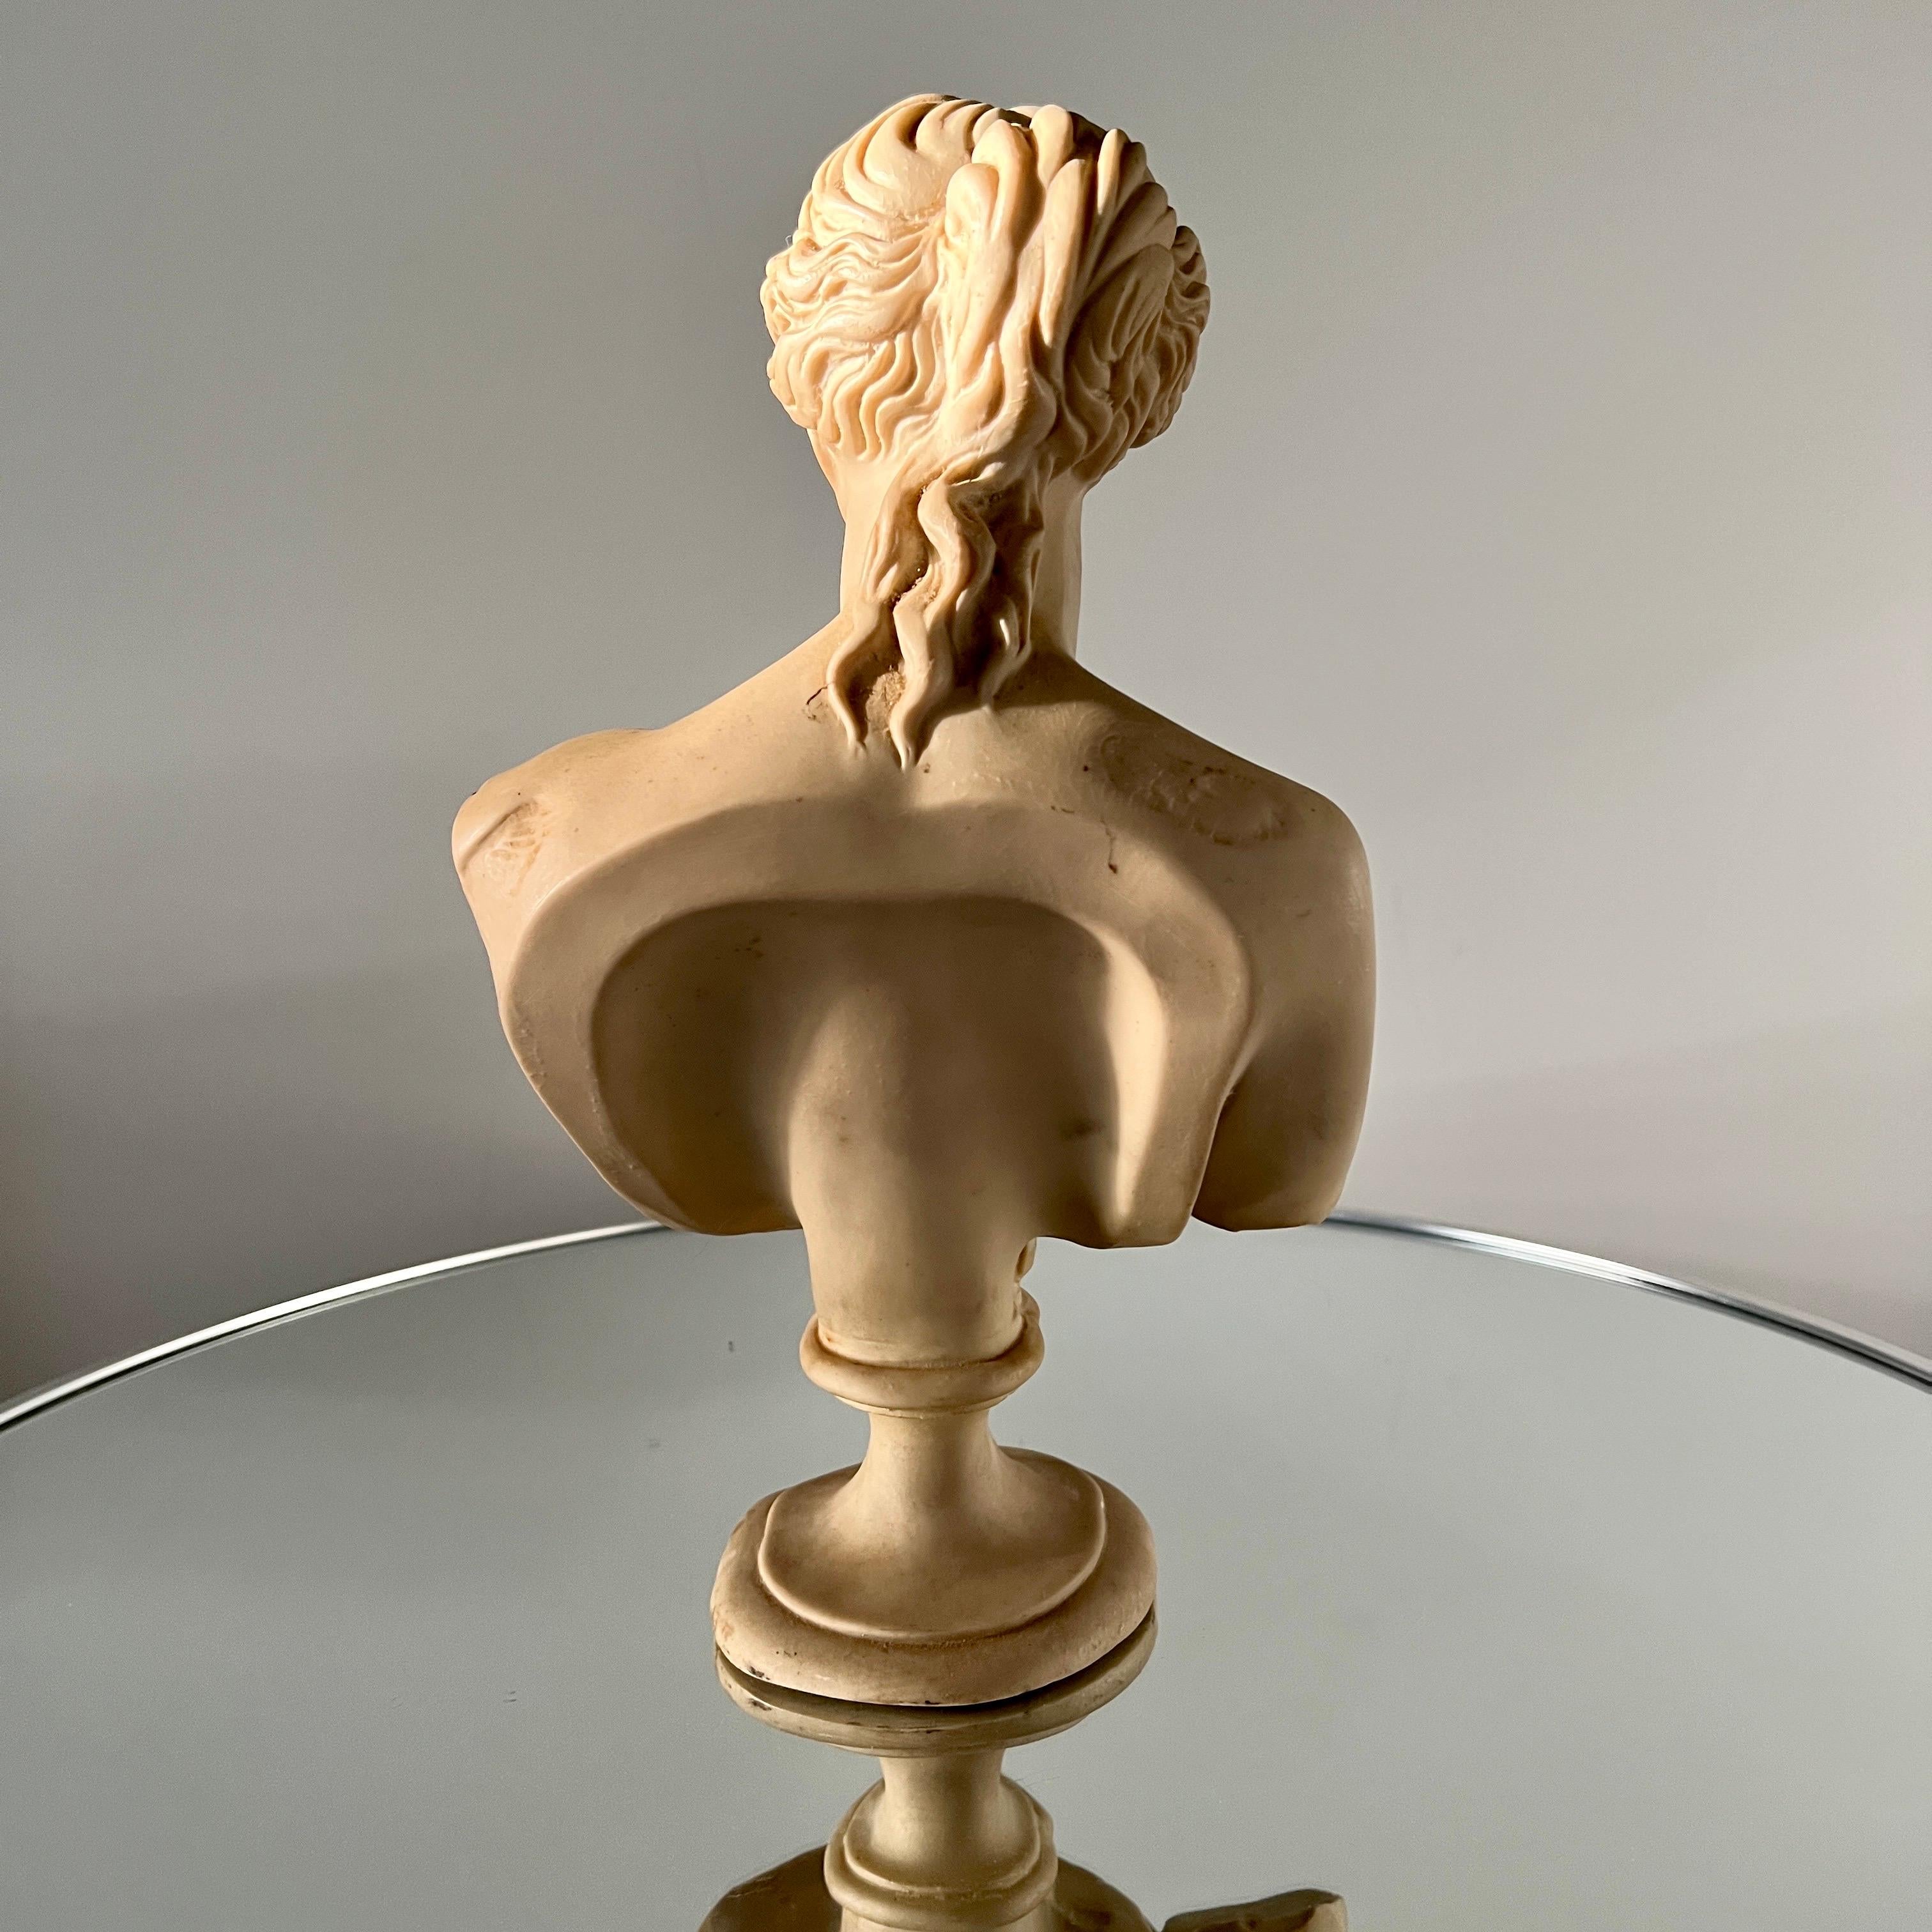 Hand-Carved Neoclassical Bust of Venus de Milo, Italy c. 1950's